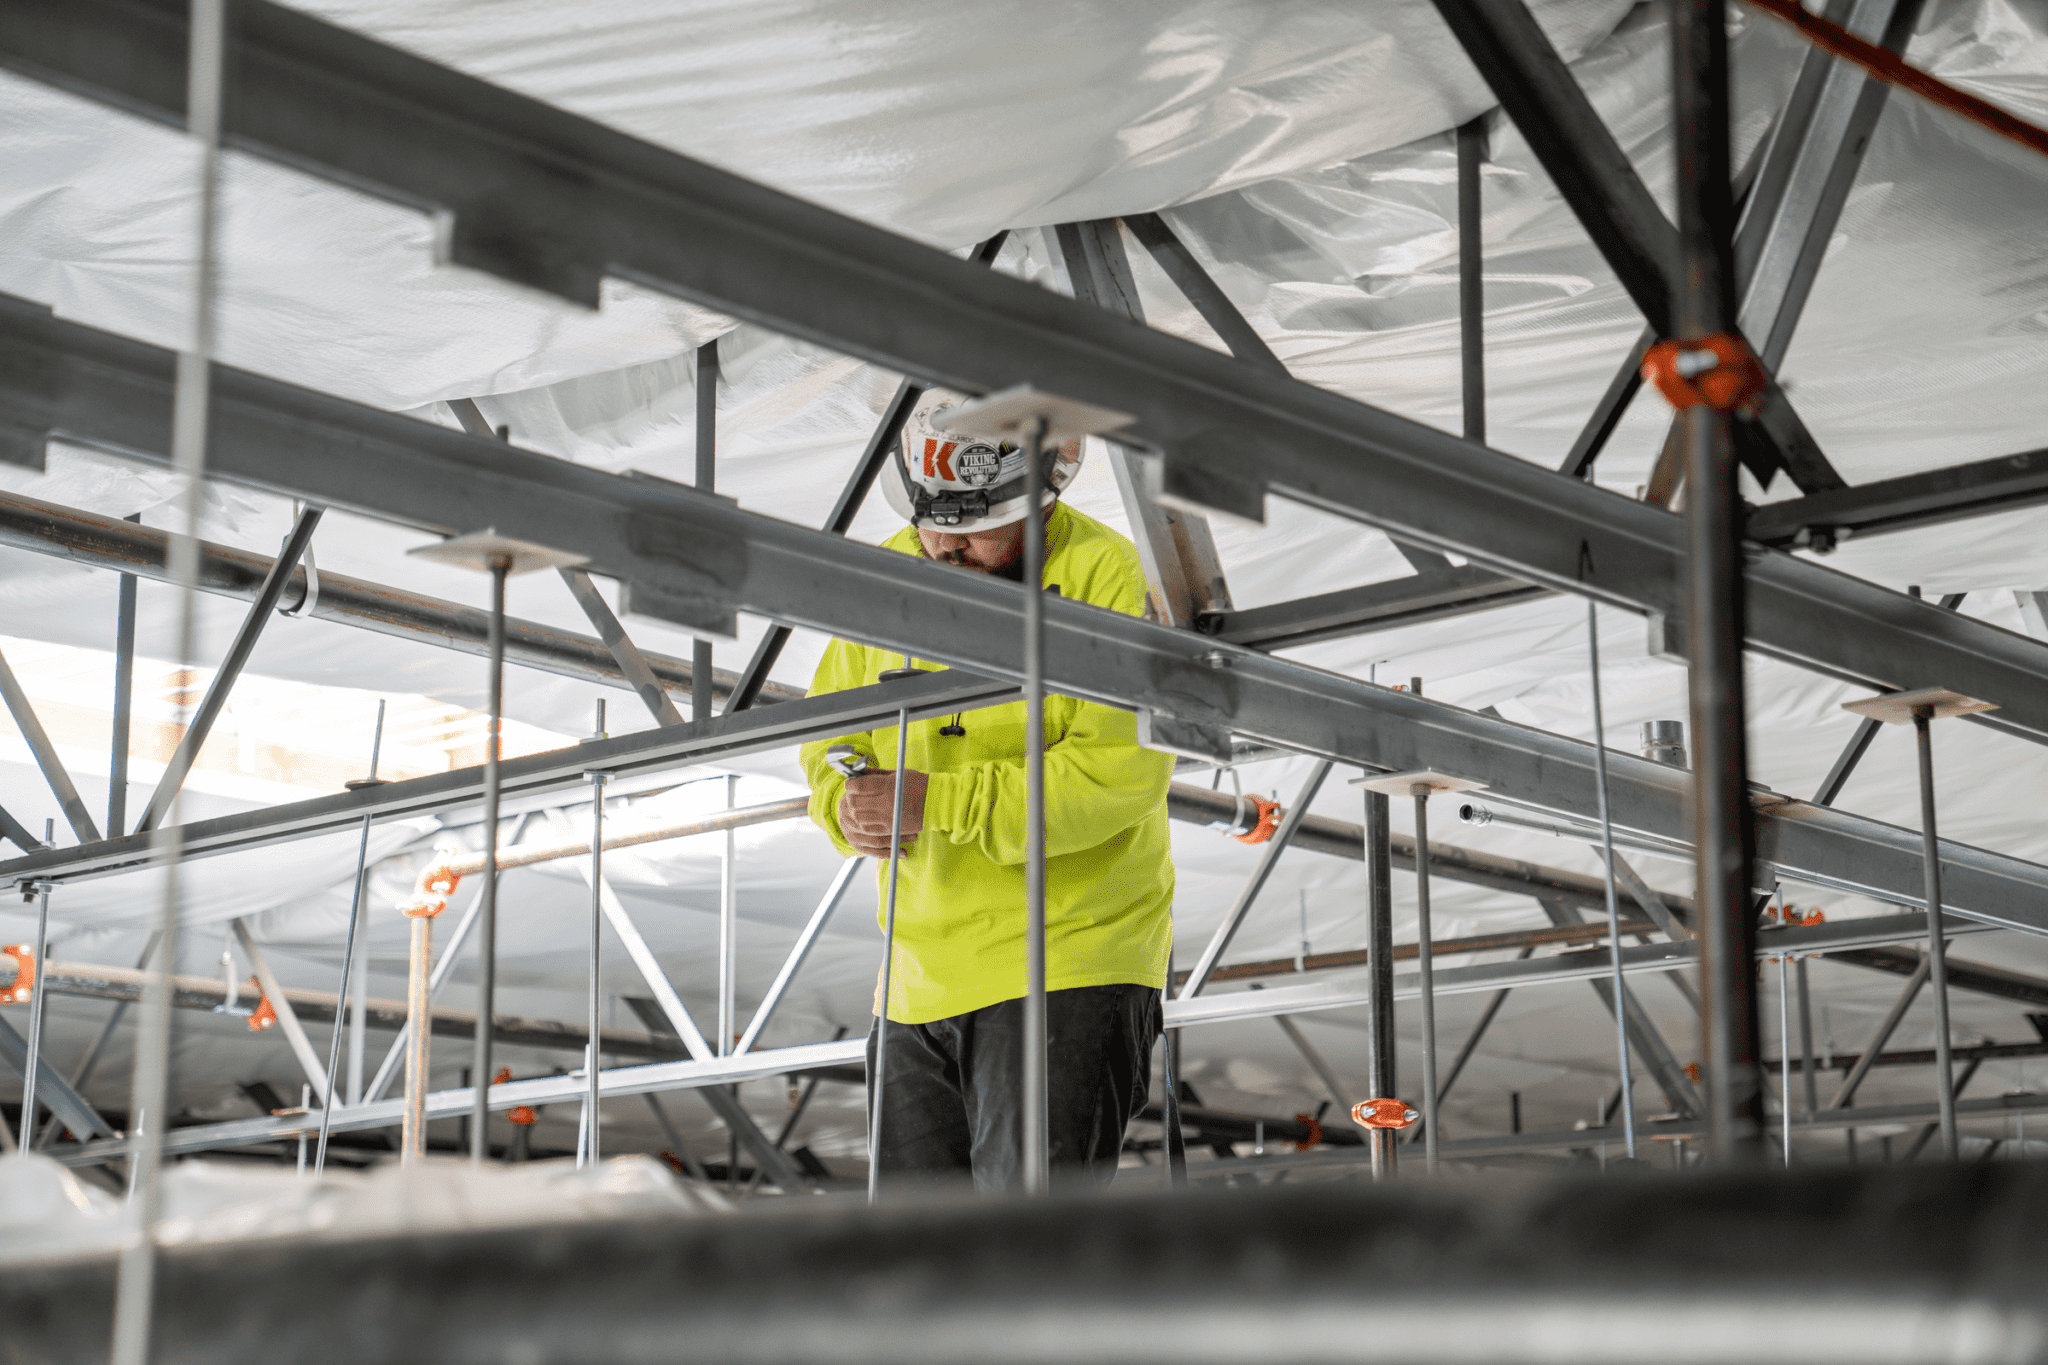 A construction worker wearing a high-visibility jacket and a helmet stands on scaffolding, utilizing a K2 Electric tool while surrounded by a framework of beams and supports.